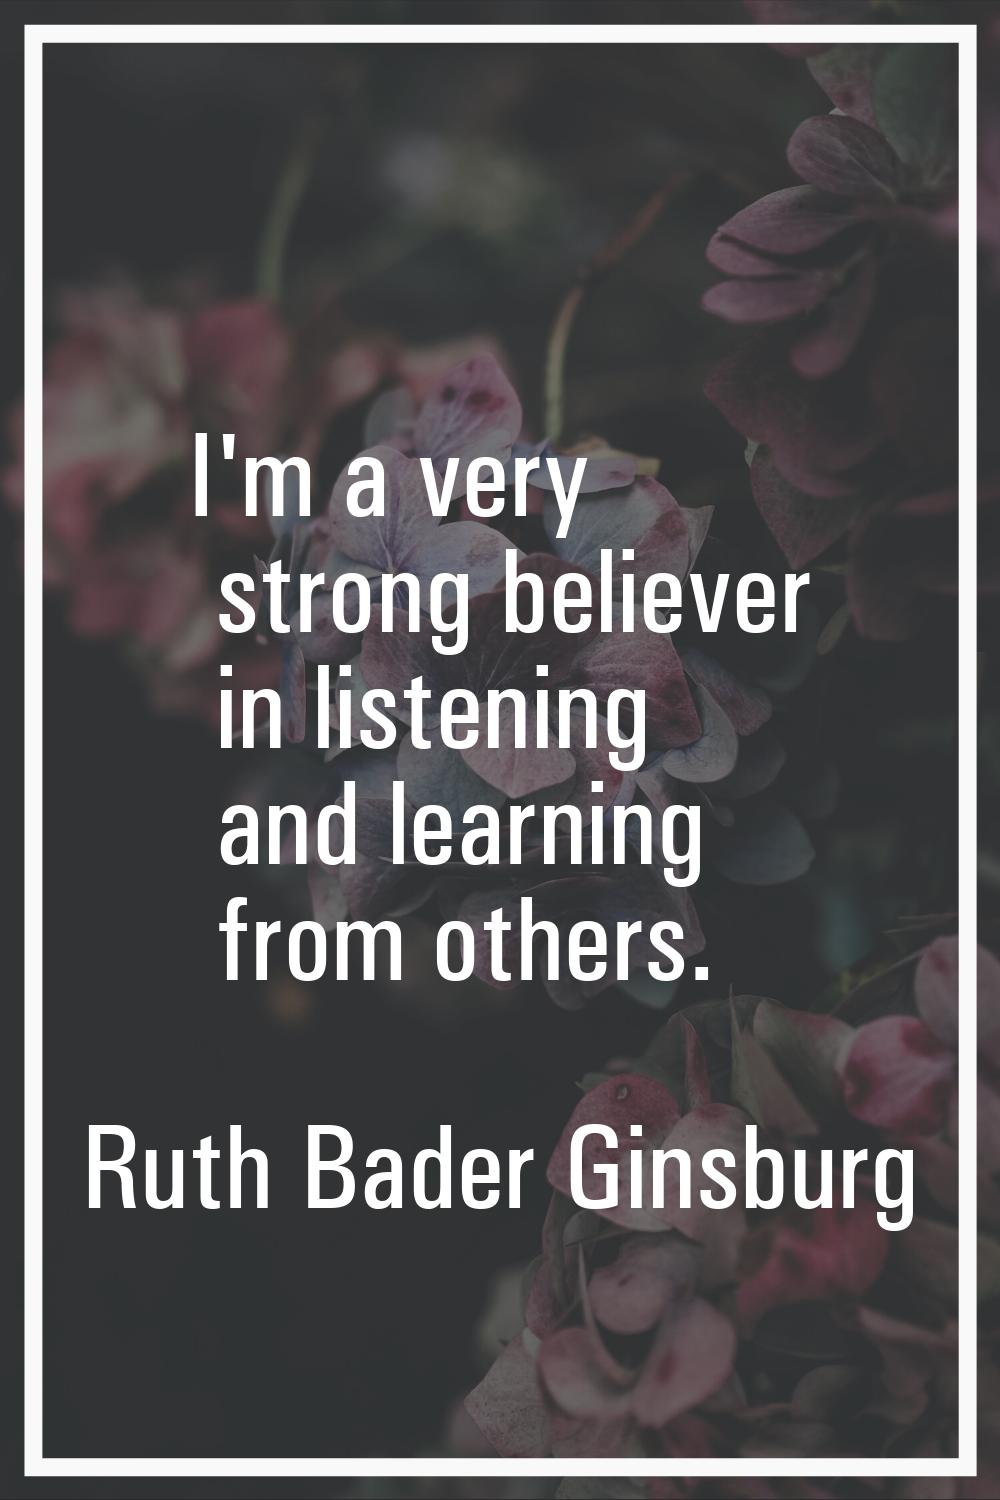 I'm a very strong believer in listening and learning from others.